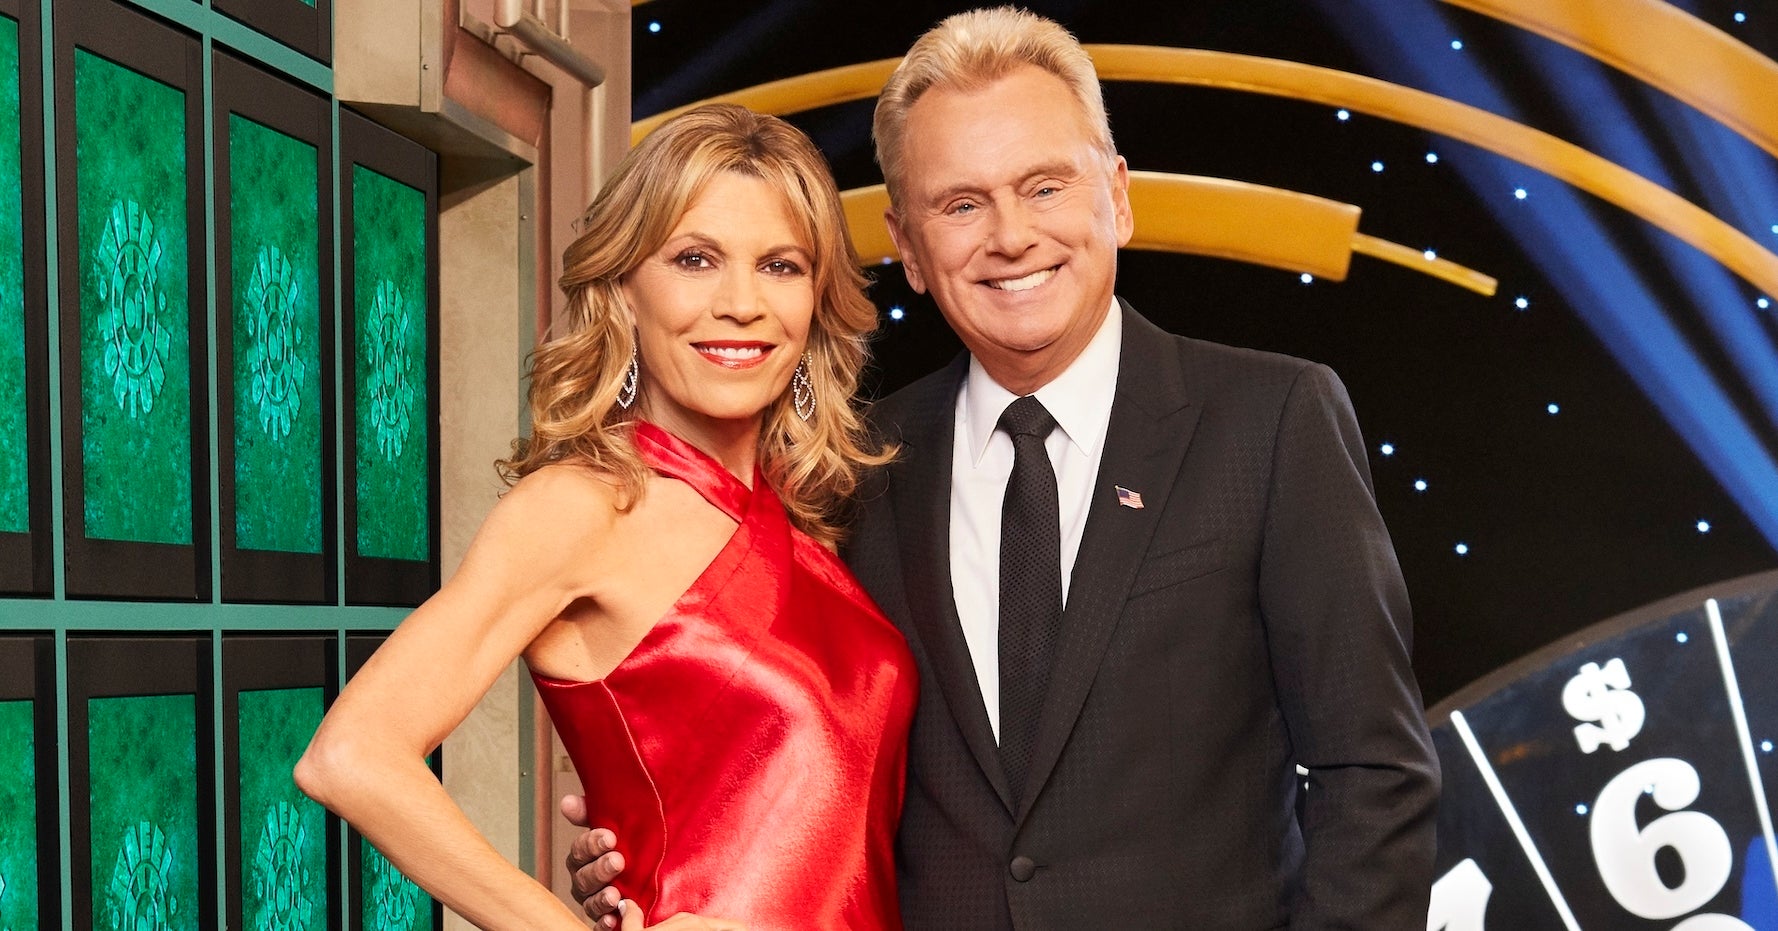 Vanna White Shares Heartfelt Tribute to ‘Wheel of Fortune’ Host Pat Sajak Ahead of His Final Episode